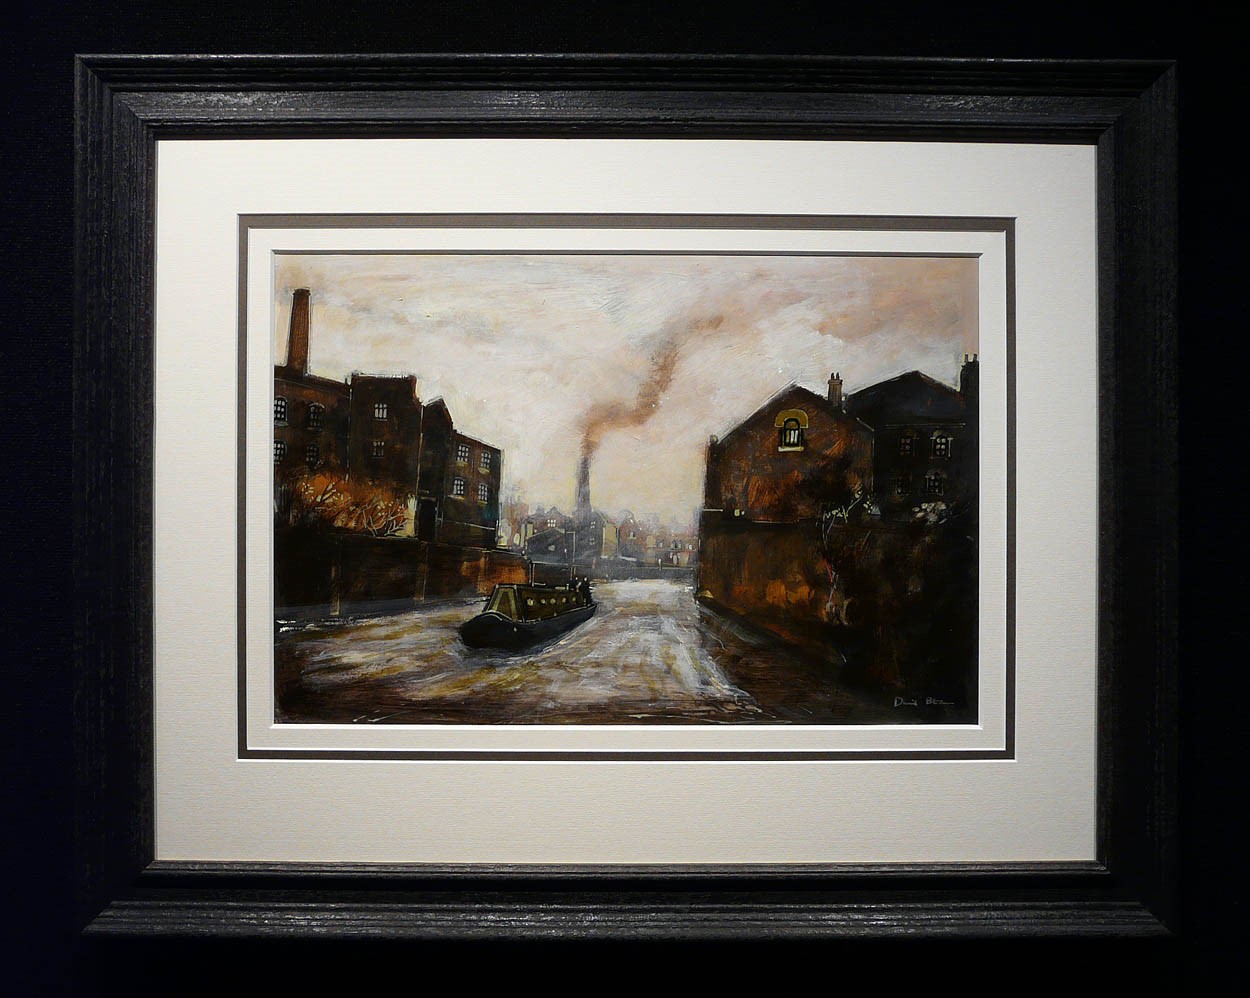 The Barge by David Bez